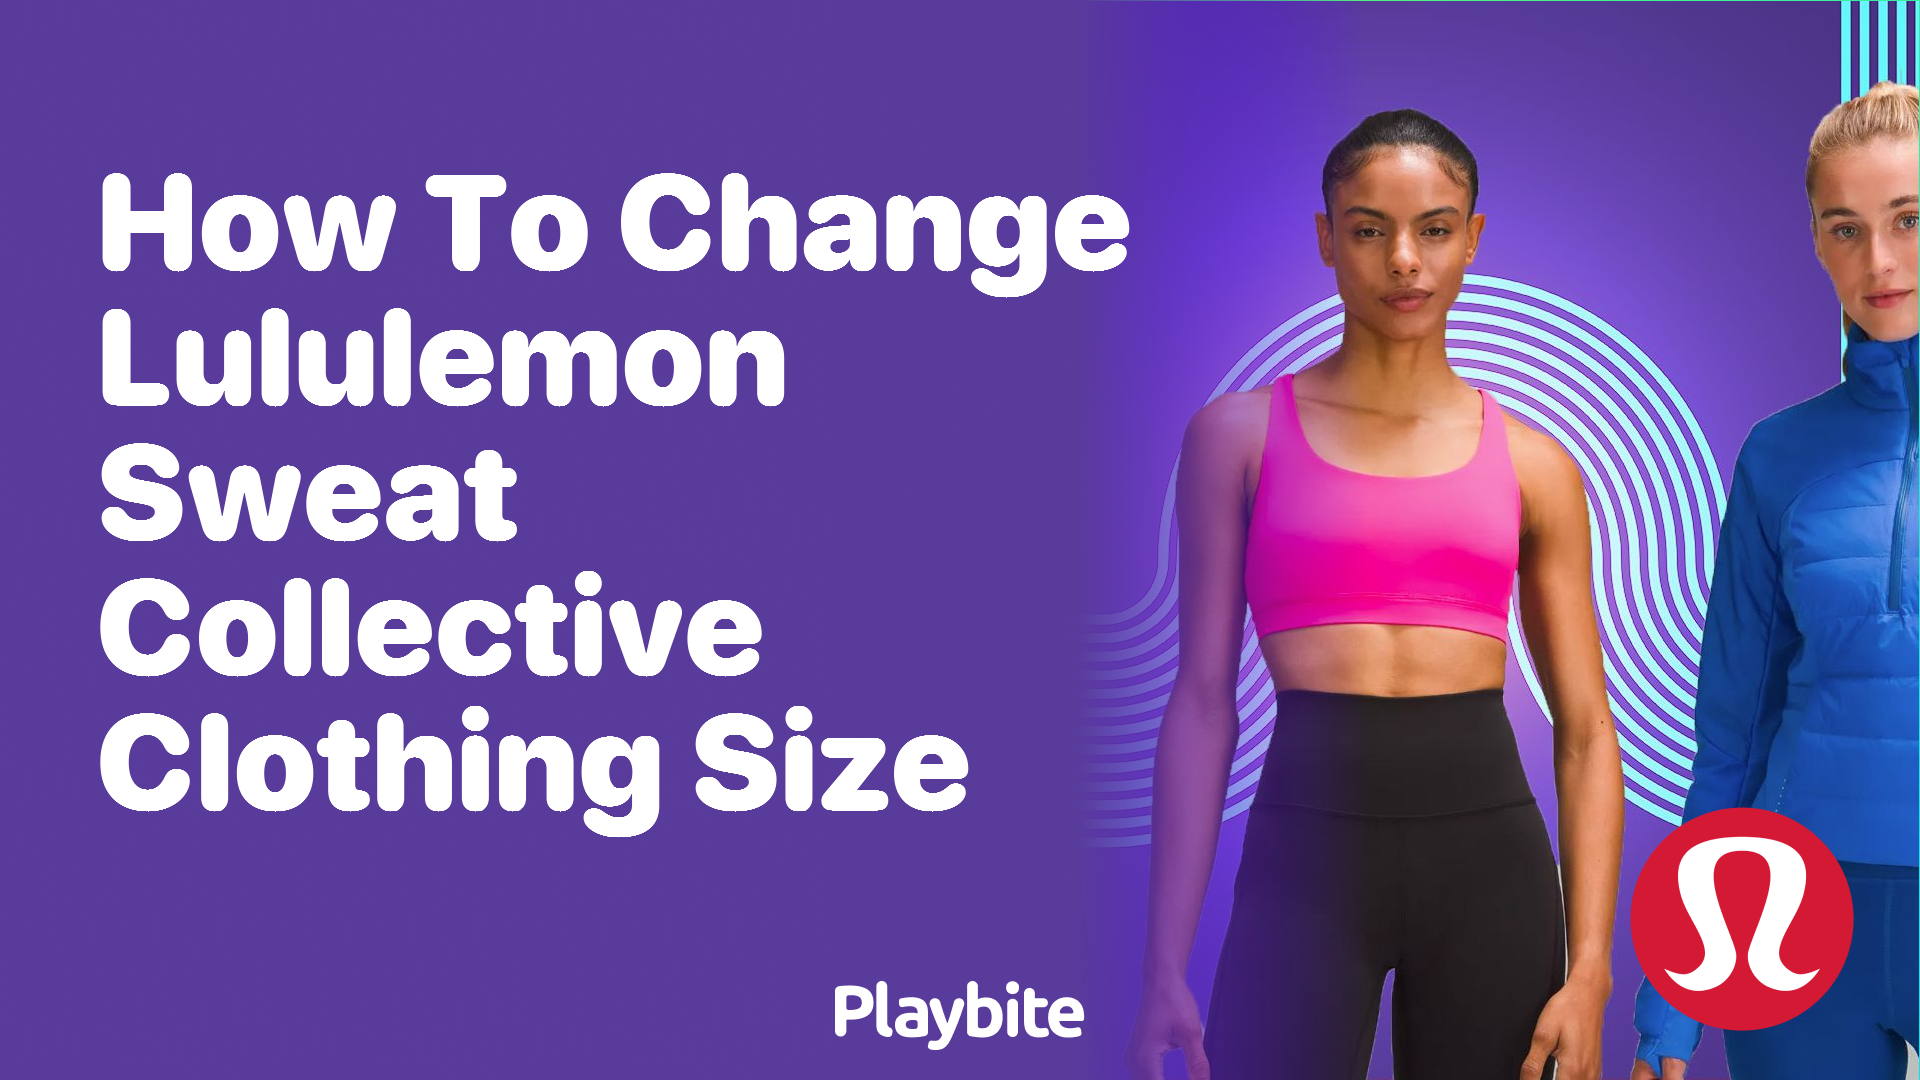 How to Change Lululemon Sweat Collective Clothing Size - Playbite